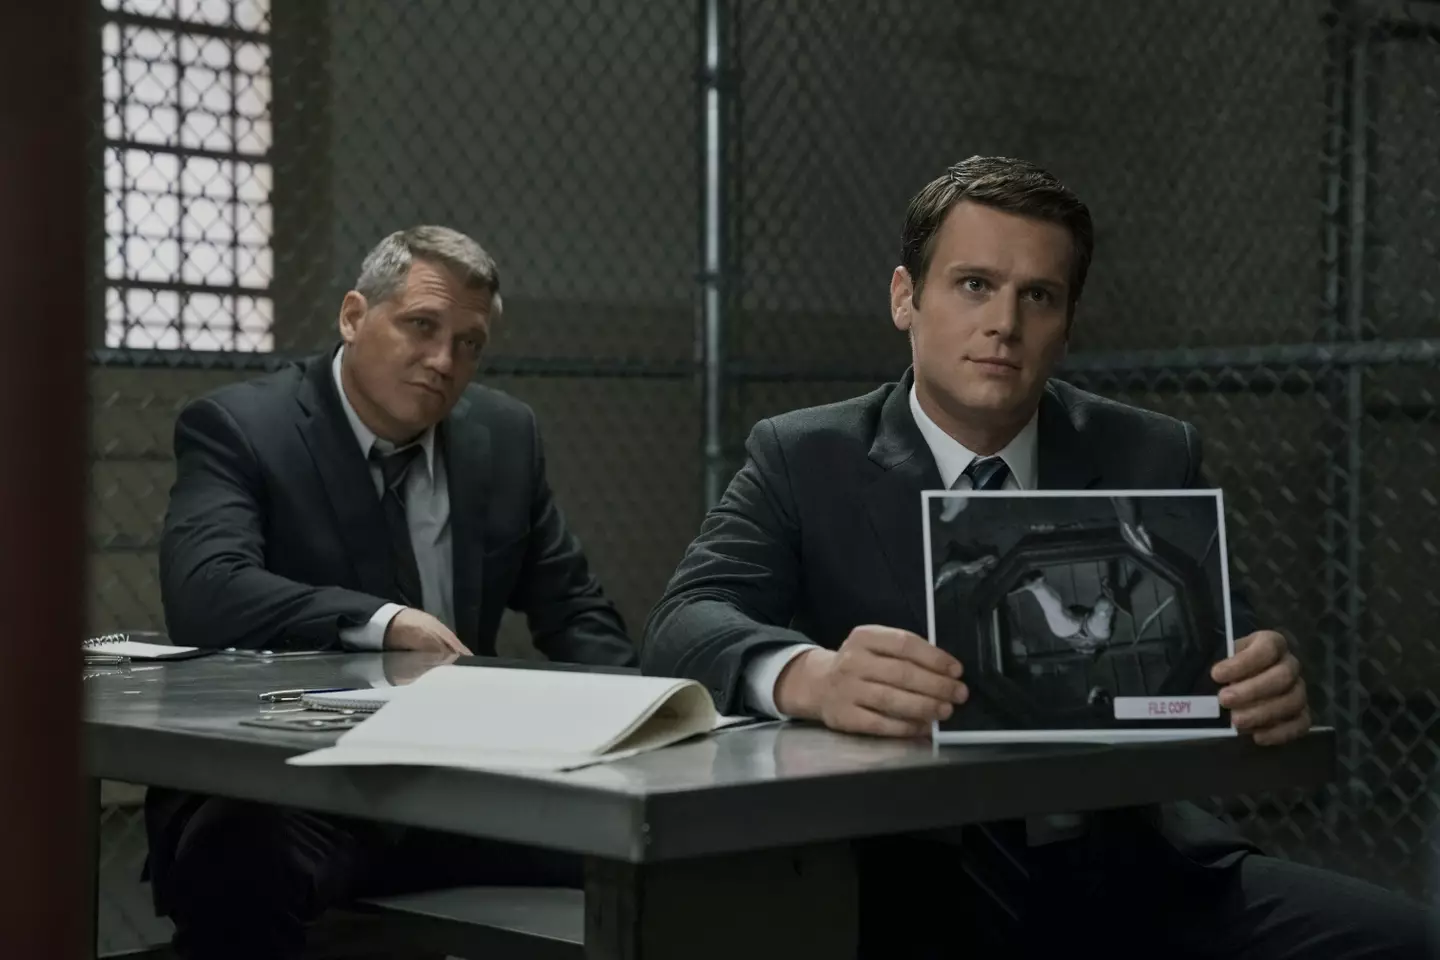 Mindhunter told the tale of an elite FBI team.